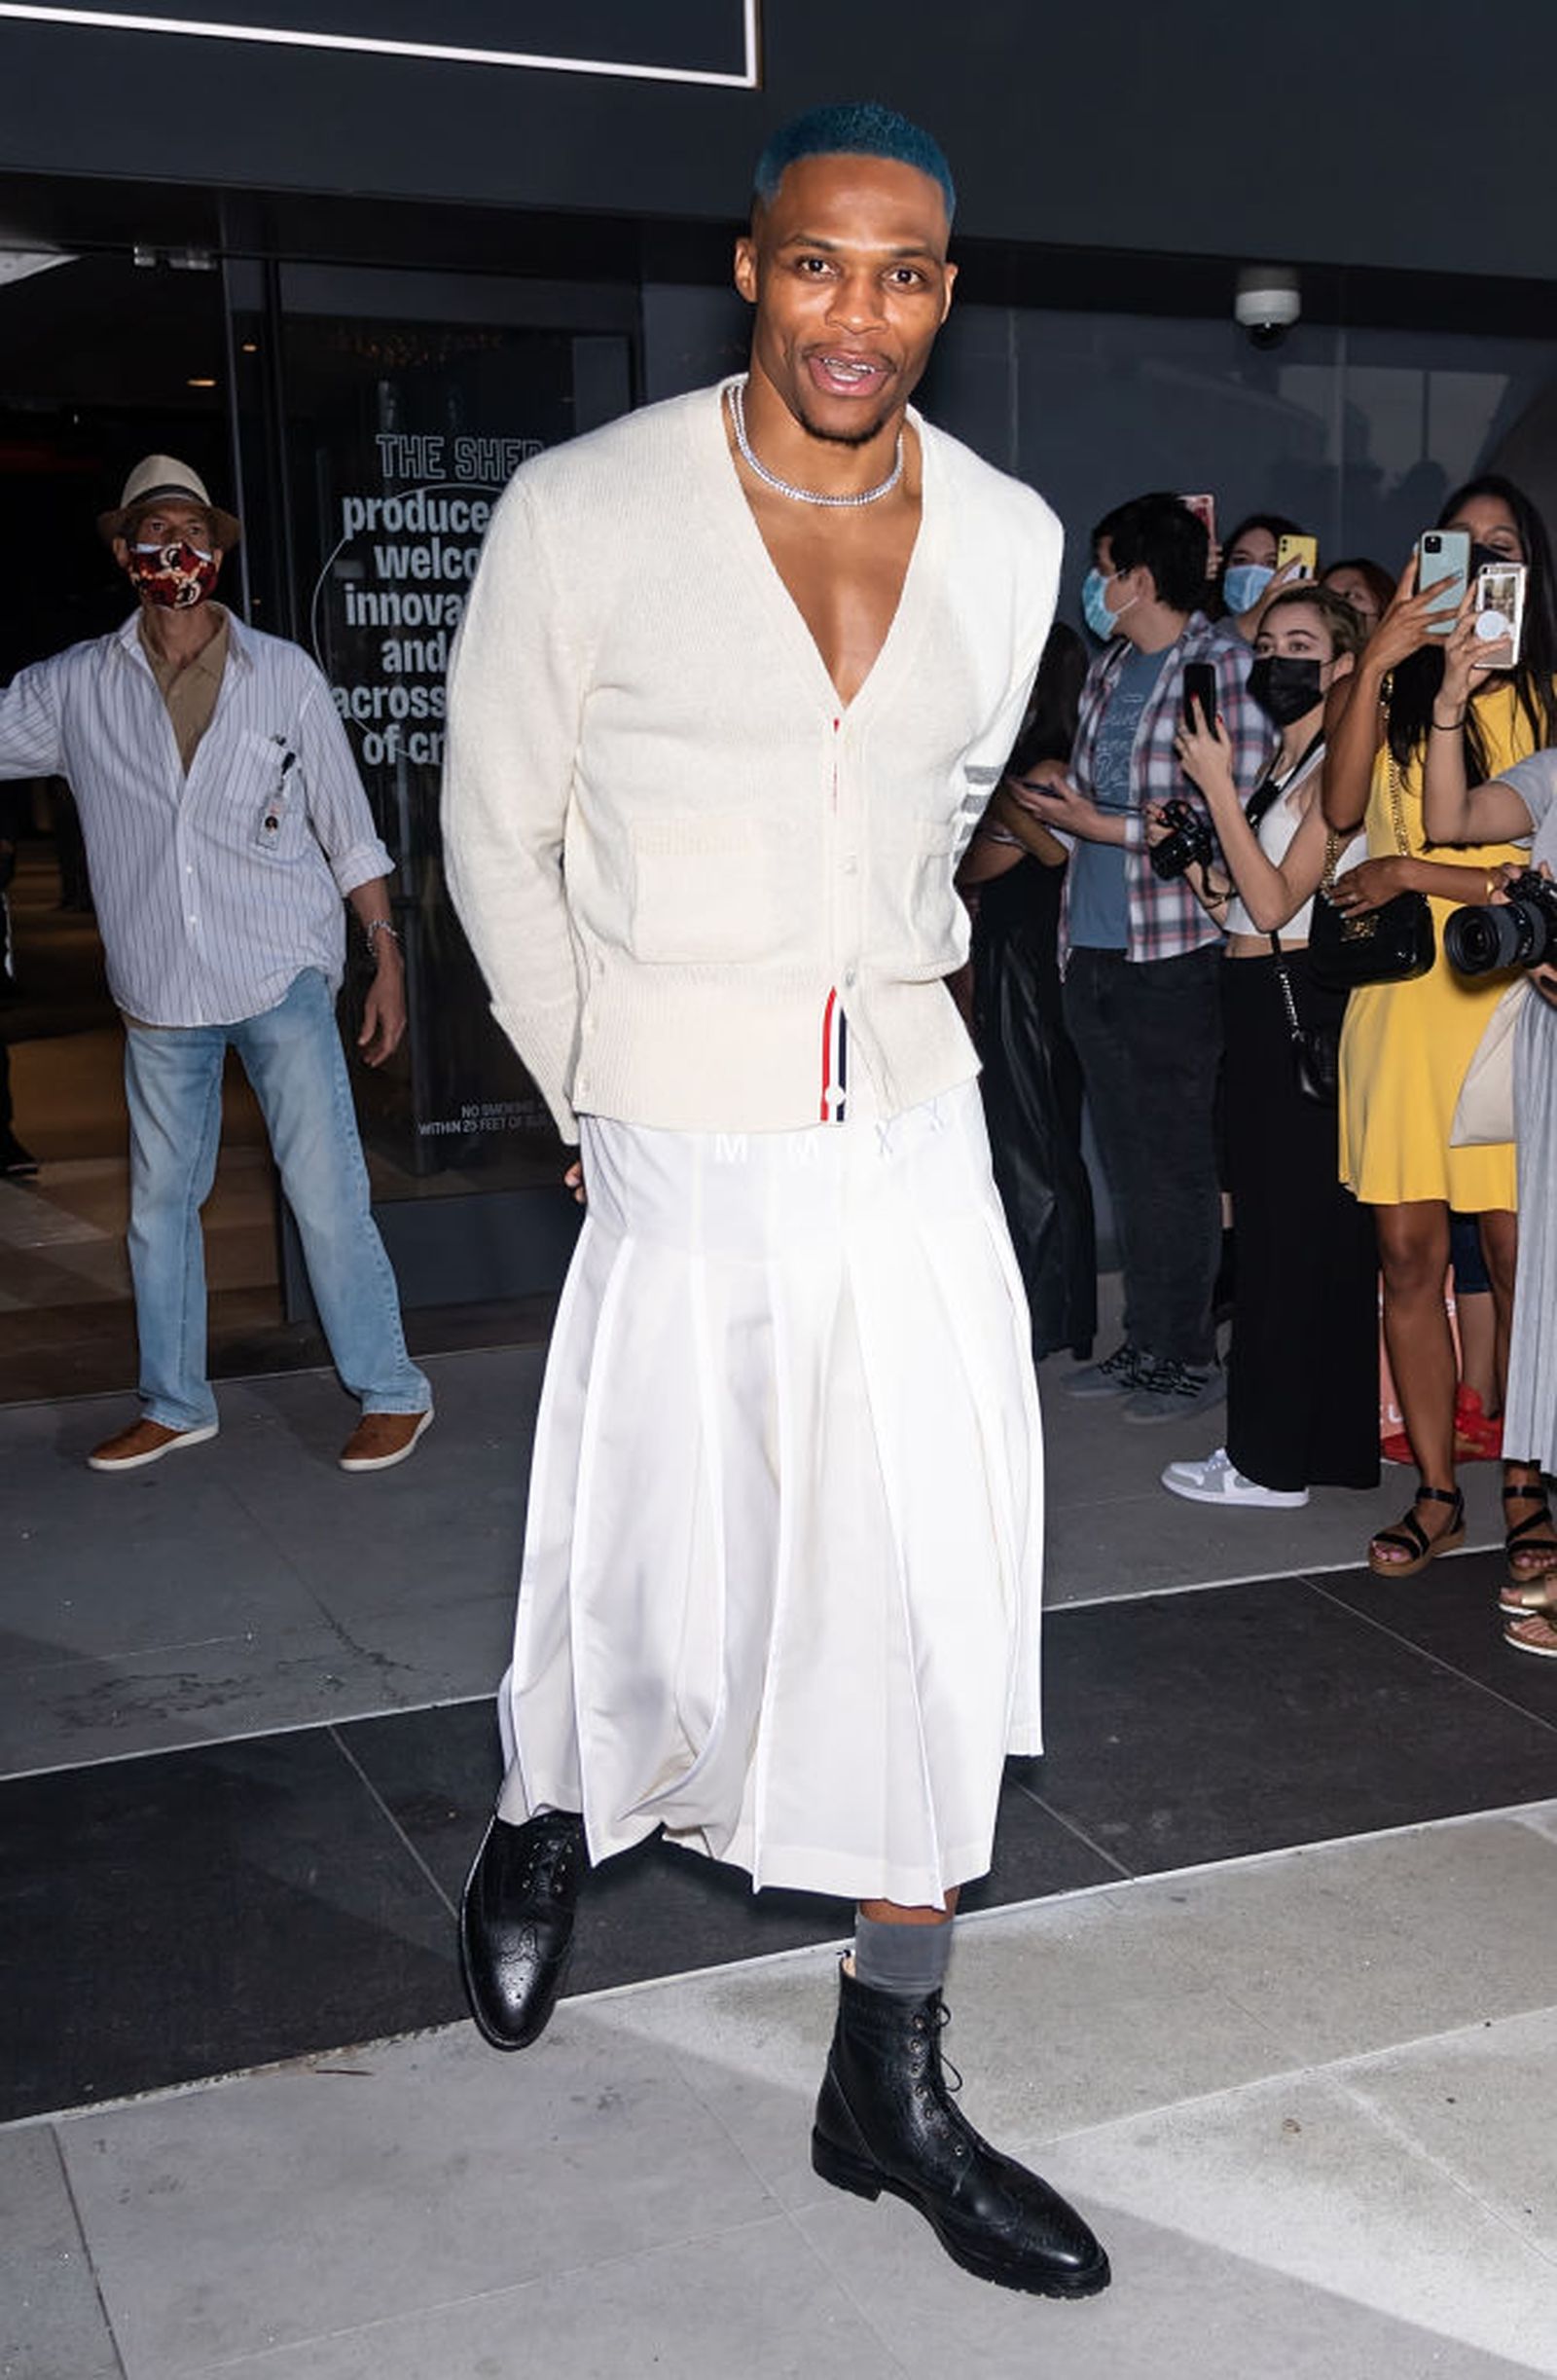 Men's Skirts Were the Real MVP at NYFW